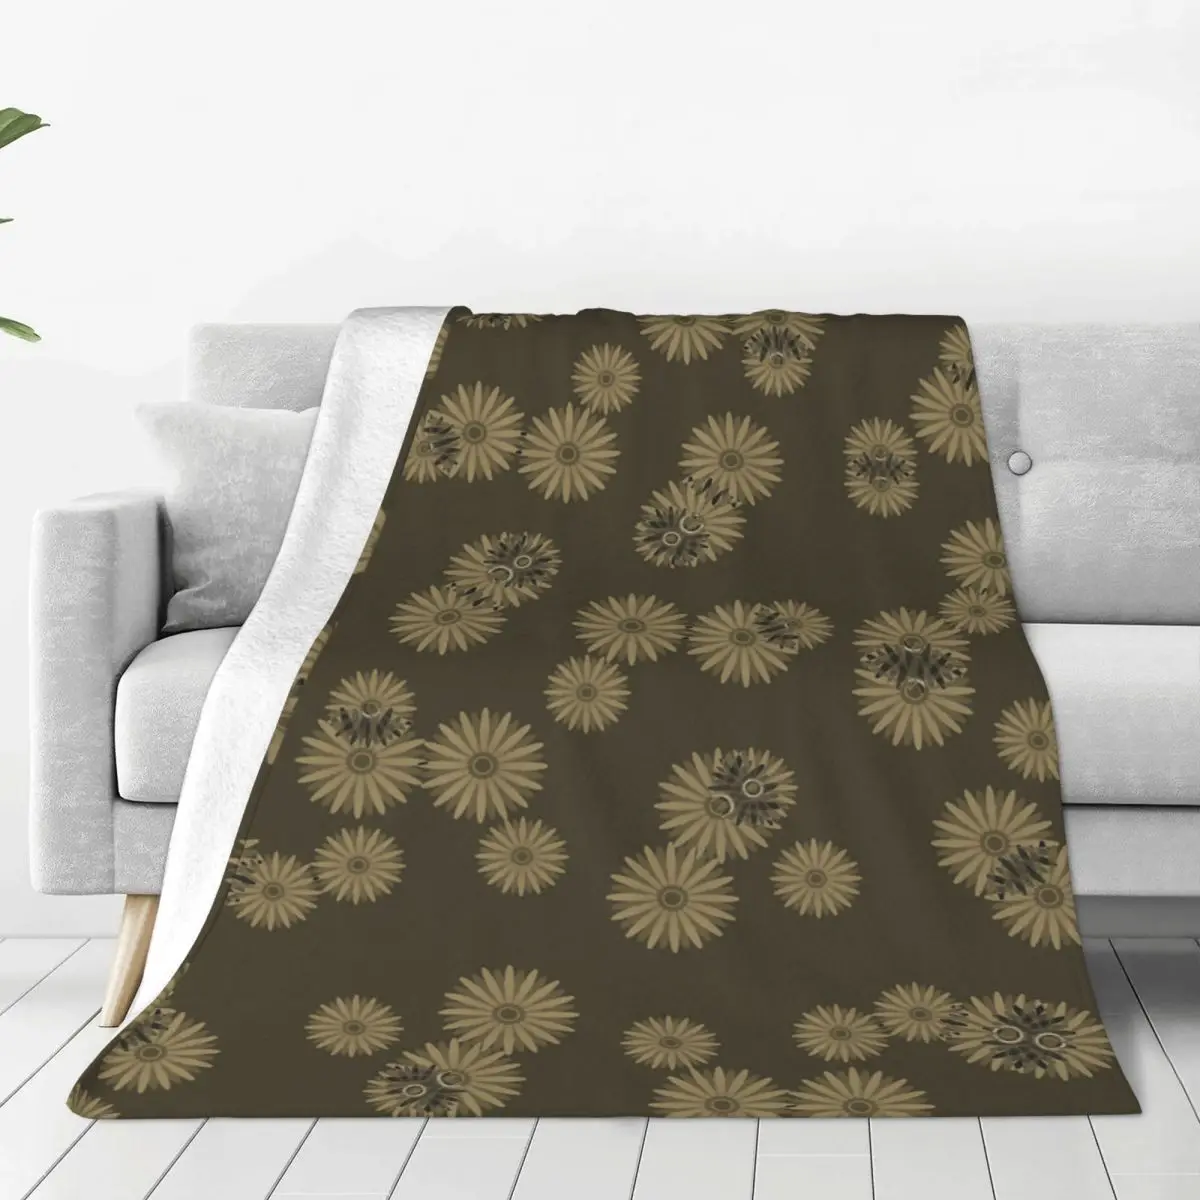 

Chrysanthemum Blanket Ultra Soft Cozy Blooming Flowers Decorative Flannel Blanket All Season For Home Couch Bed Chair Travel